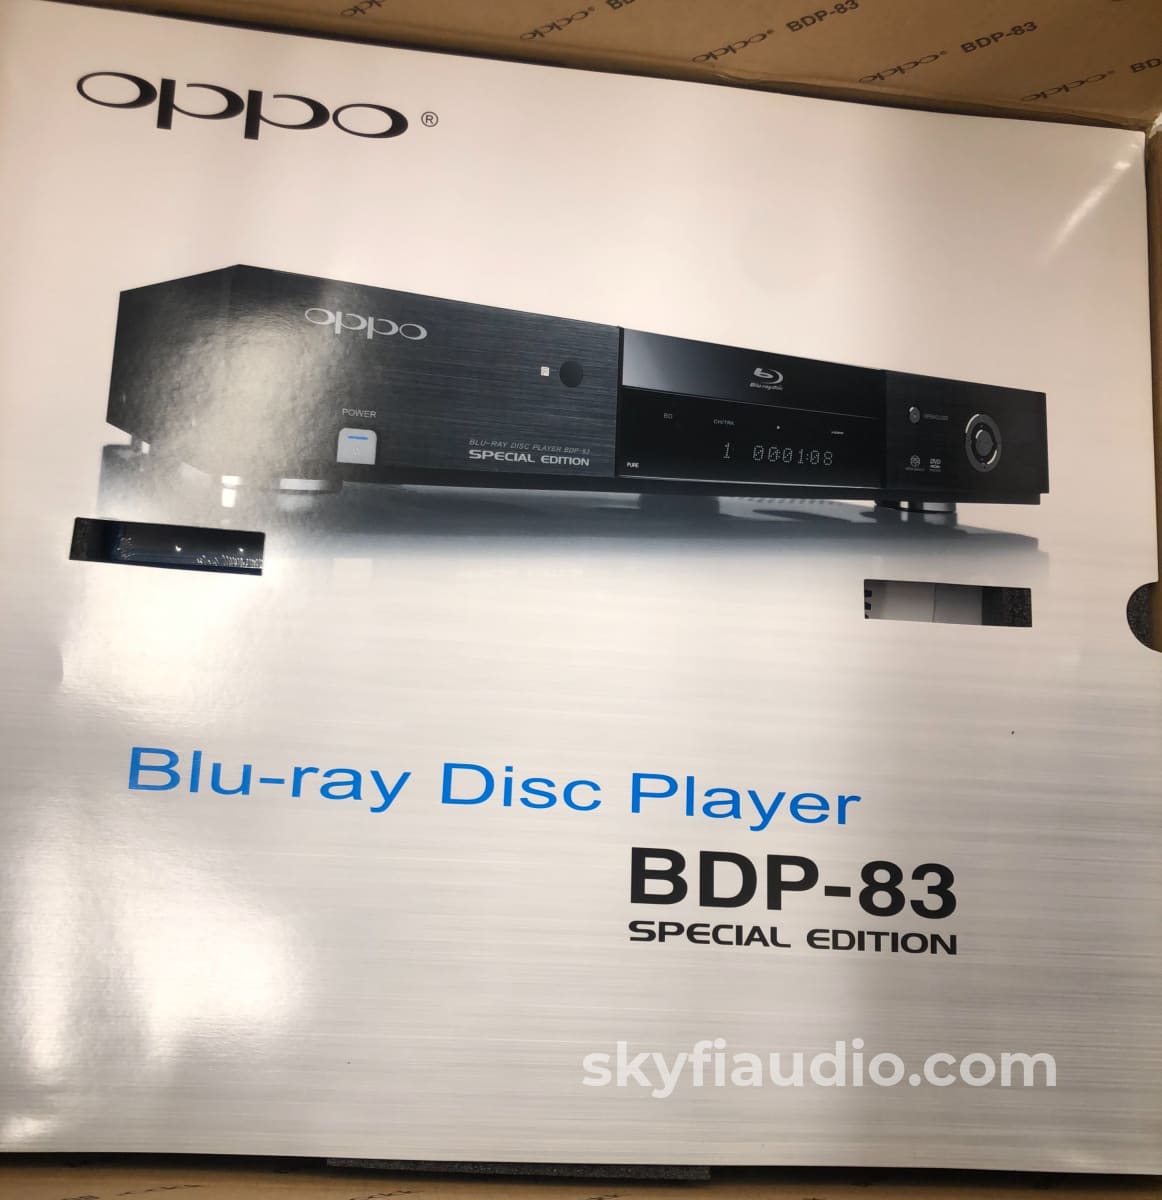 Oppo BDP-83 SE (Special Edition) BRAND NEW SACD Blu-Ray Player - Last